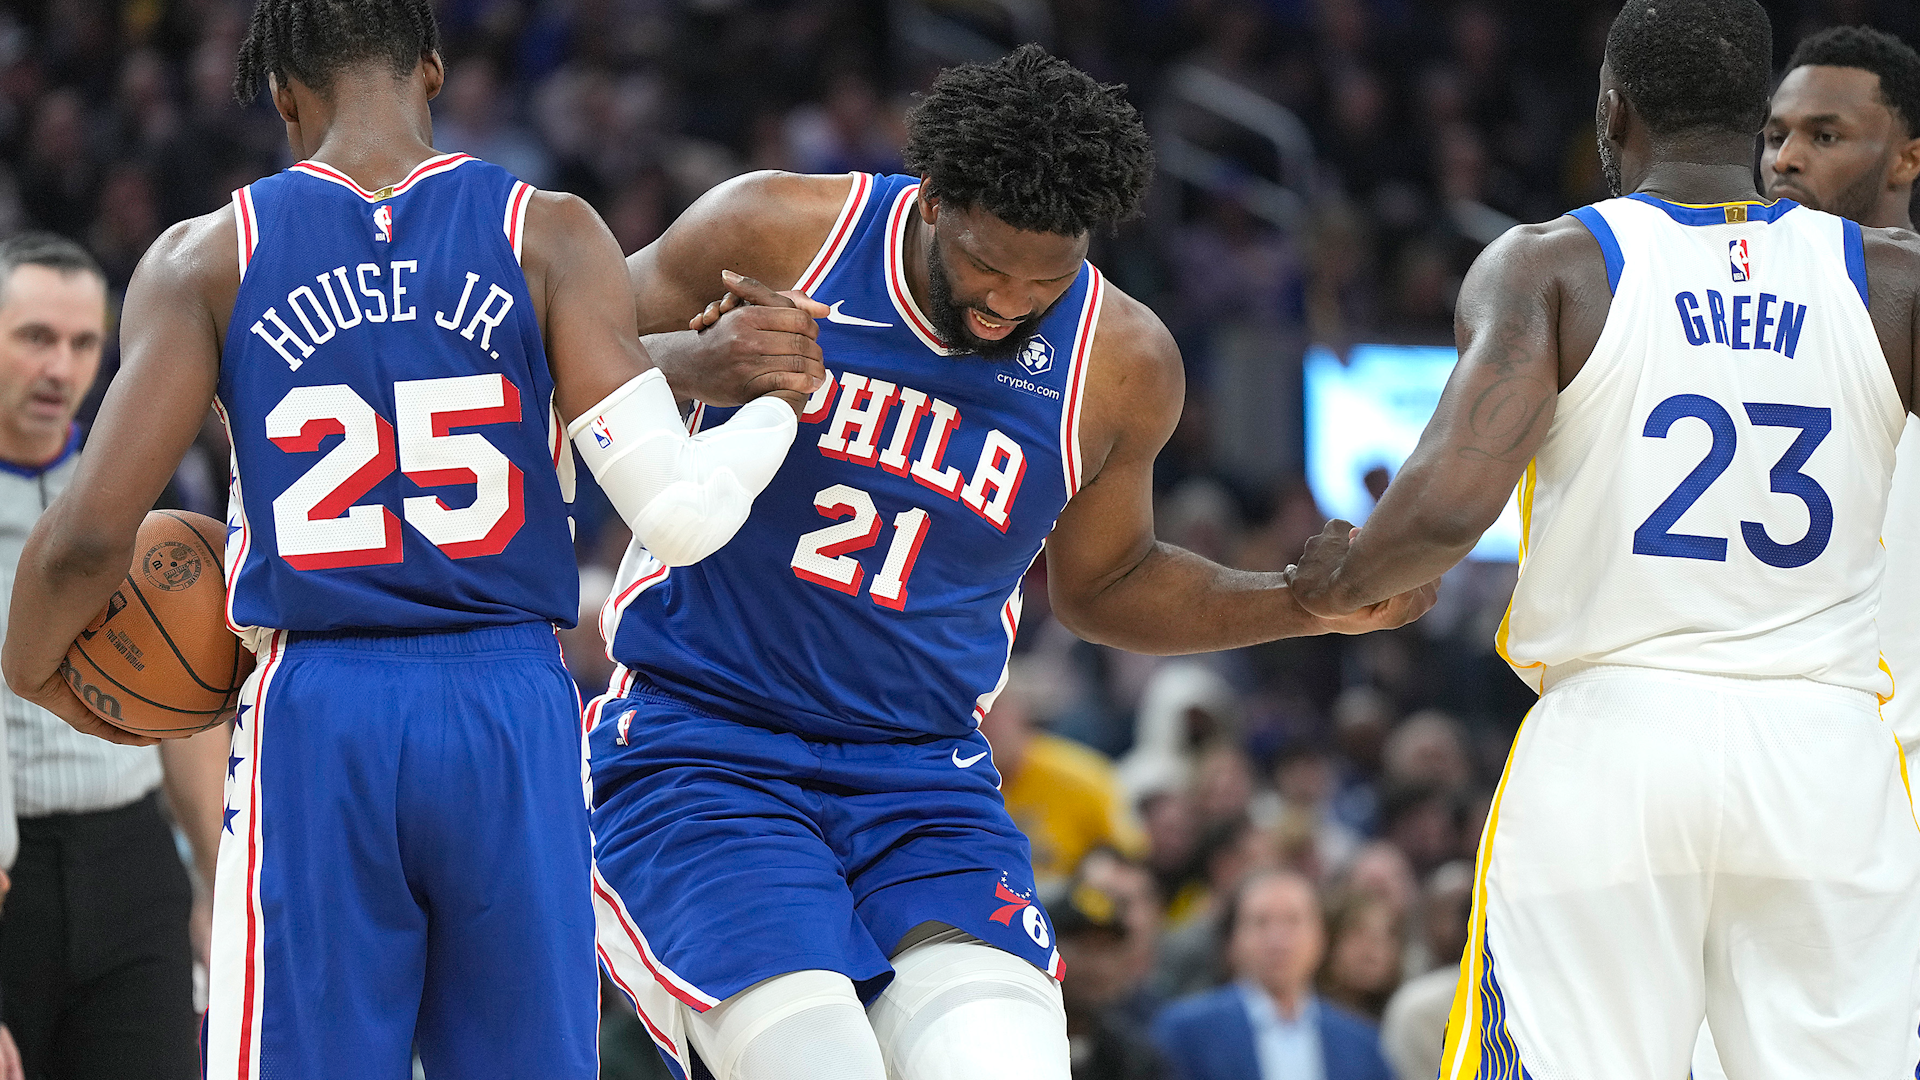 Embiid's Knee Injury, All-Star Snubs, Brunson's Highlight, and Lakers' LeBron